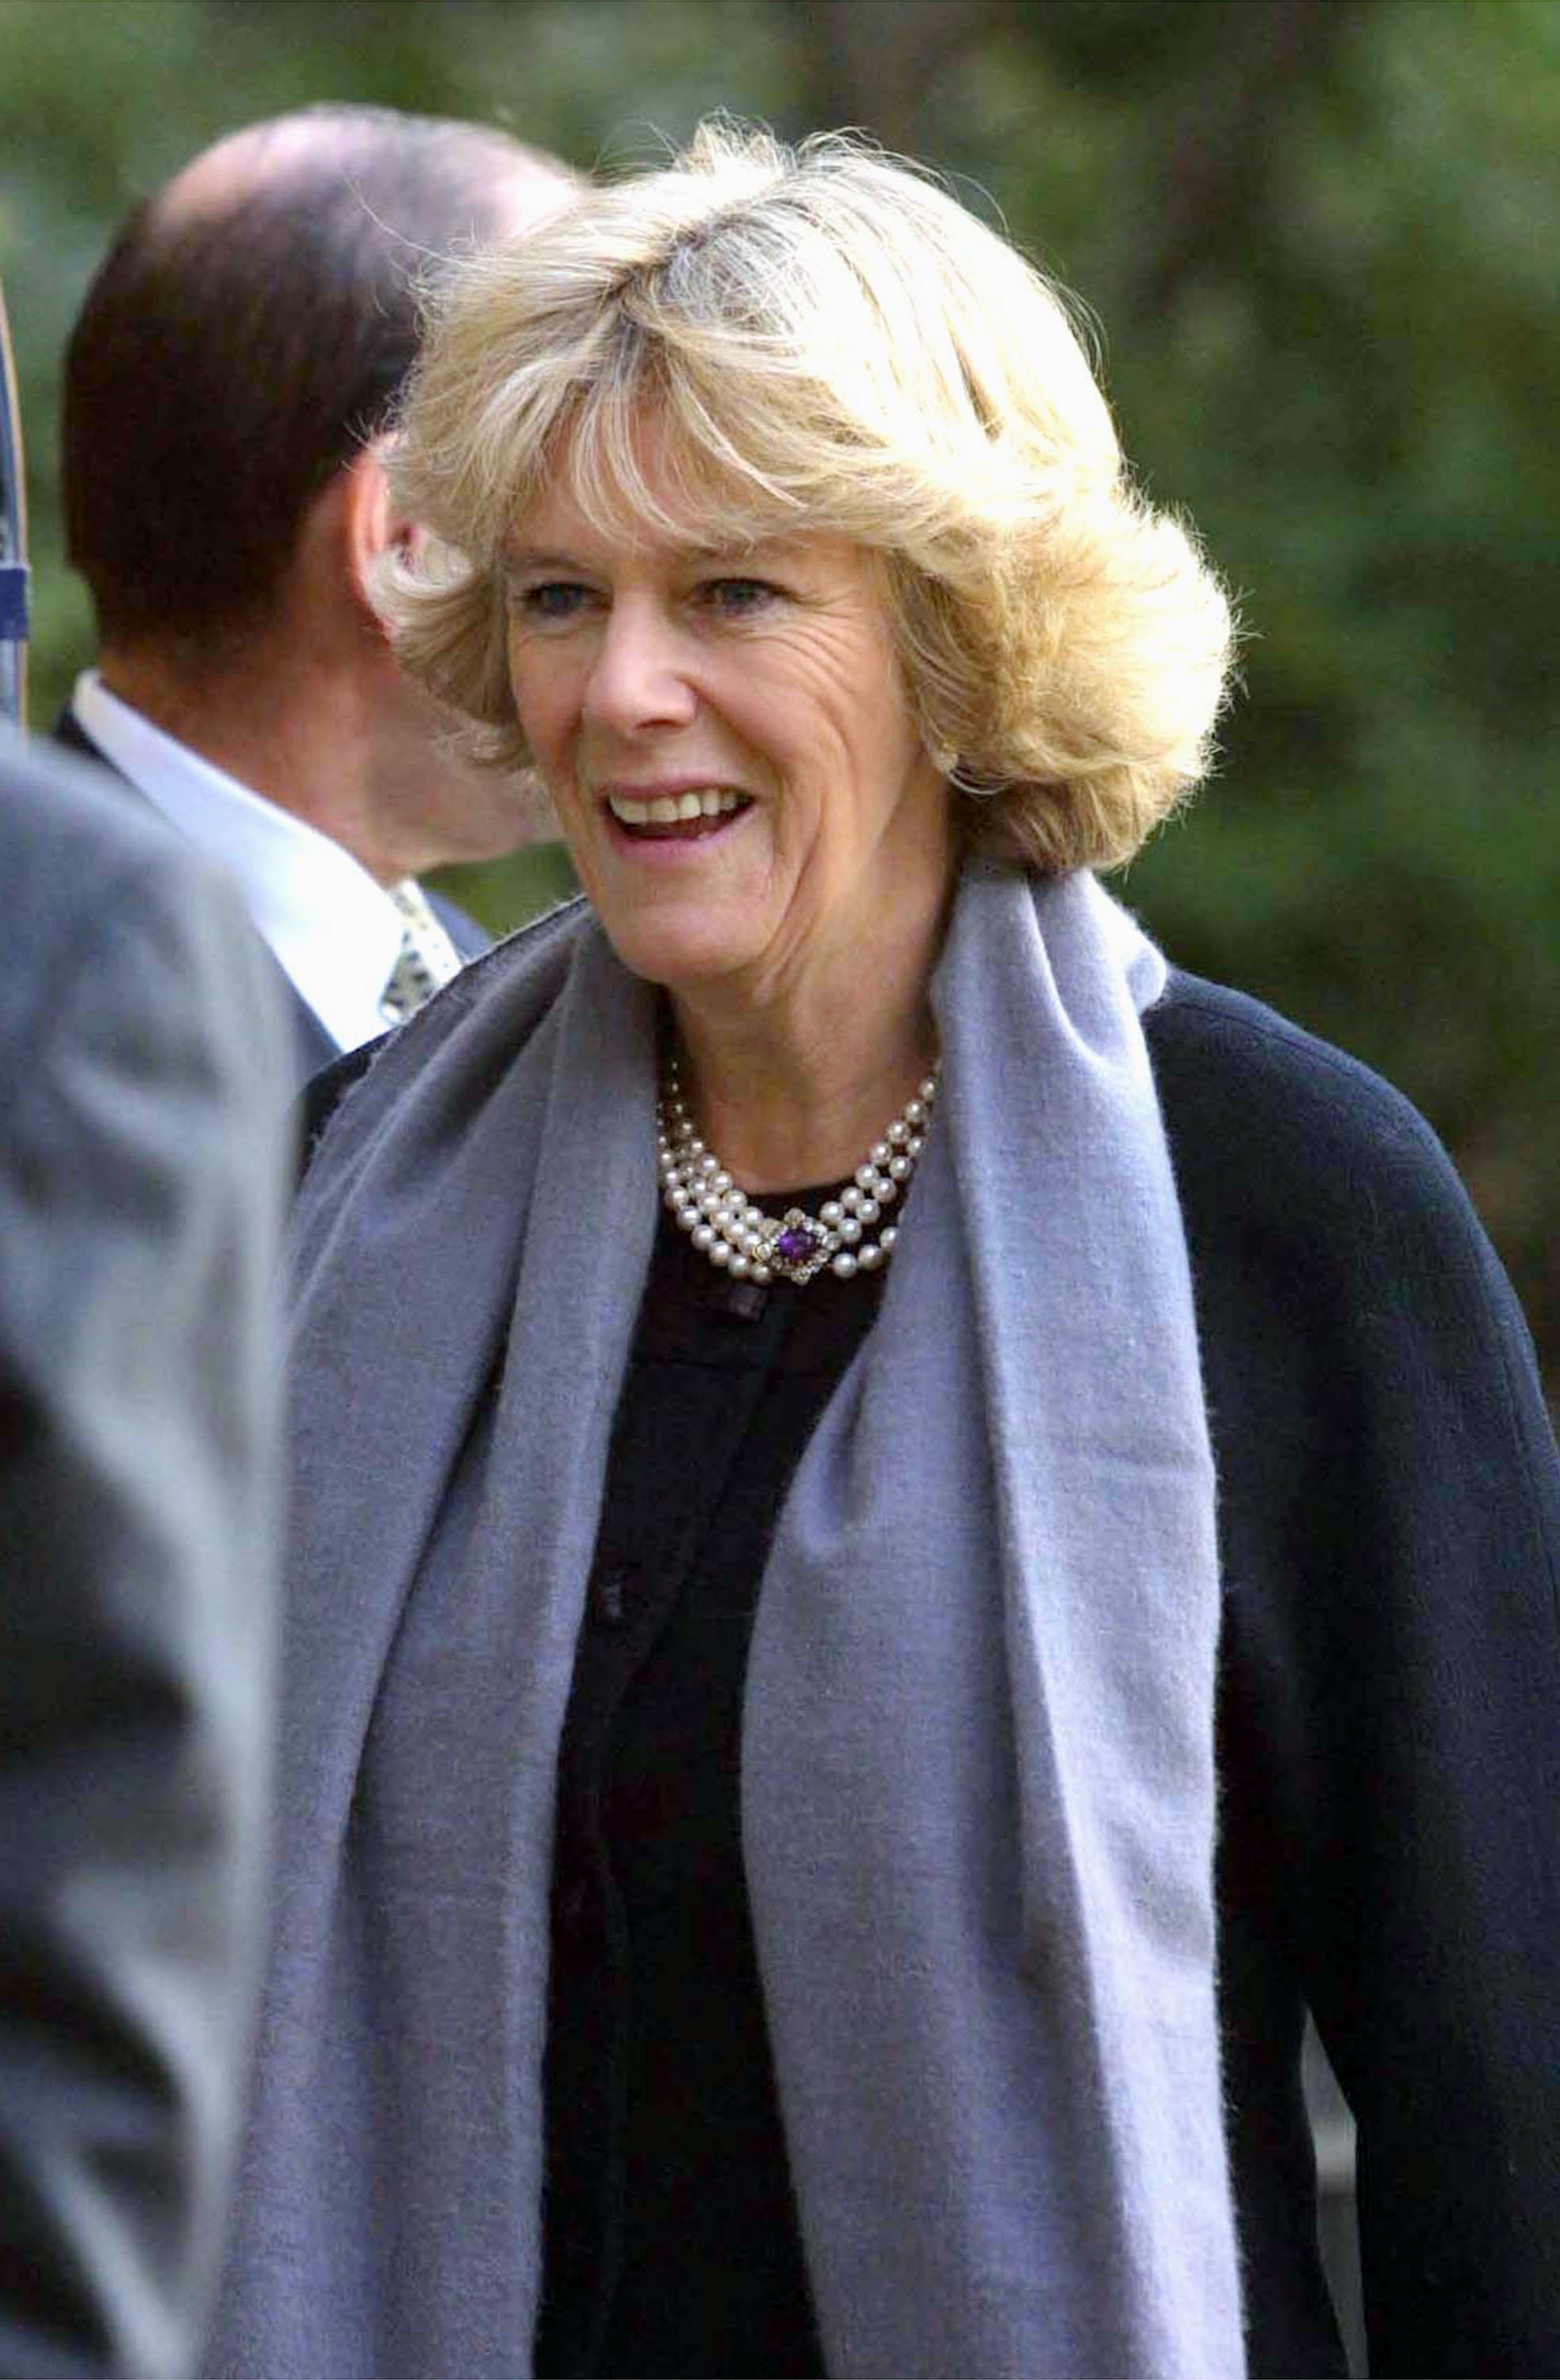 Duchess Camilla at the St. James Palace Christmas party on December 19, 2001, in London, England. | Source: Getty Images